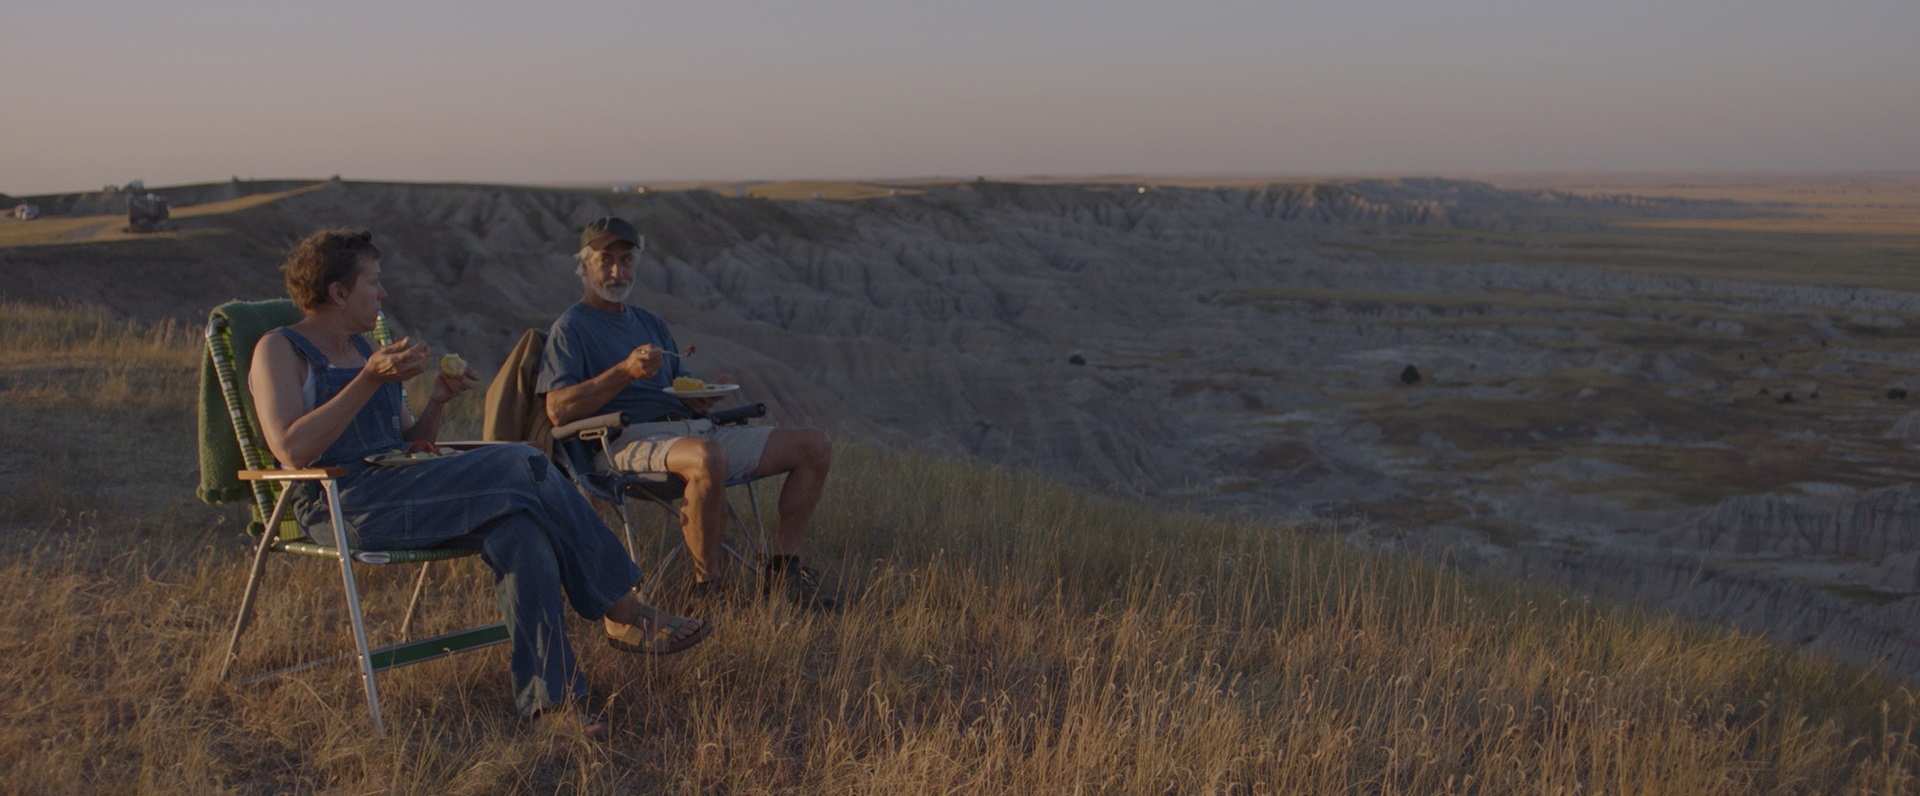 Late afternoon shot of older woman and man in camper chairs overlooking flat grassland, eating from plates in their laps.